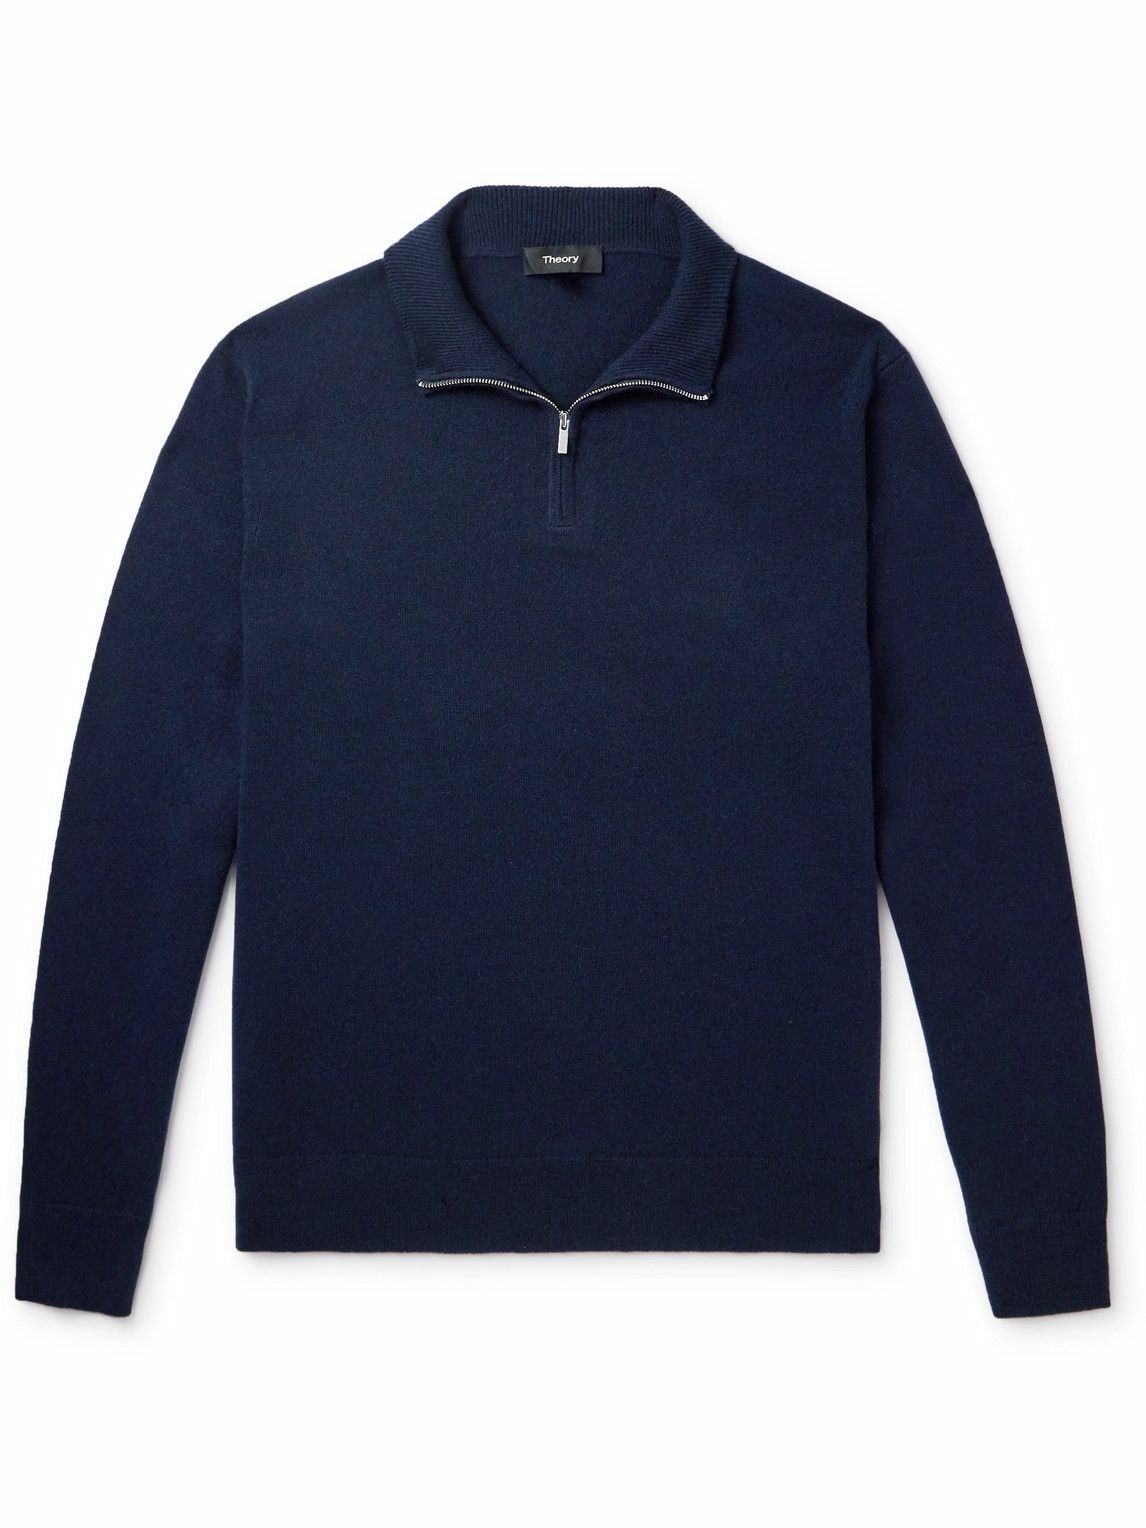 Theory - Hilles Cashmere Half-Zip Sweater - Blue Theory